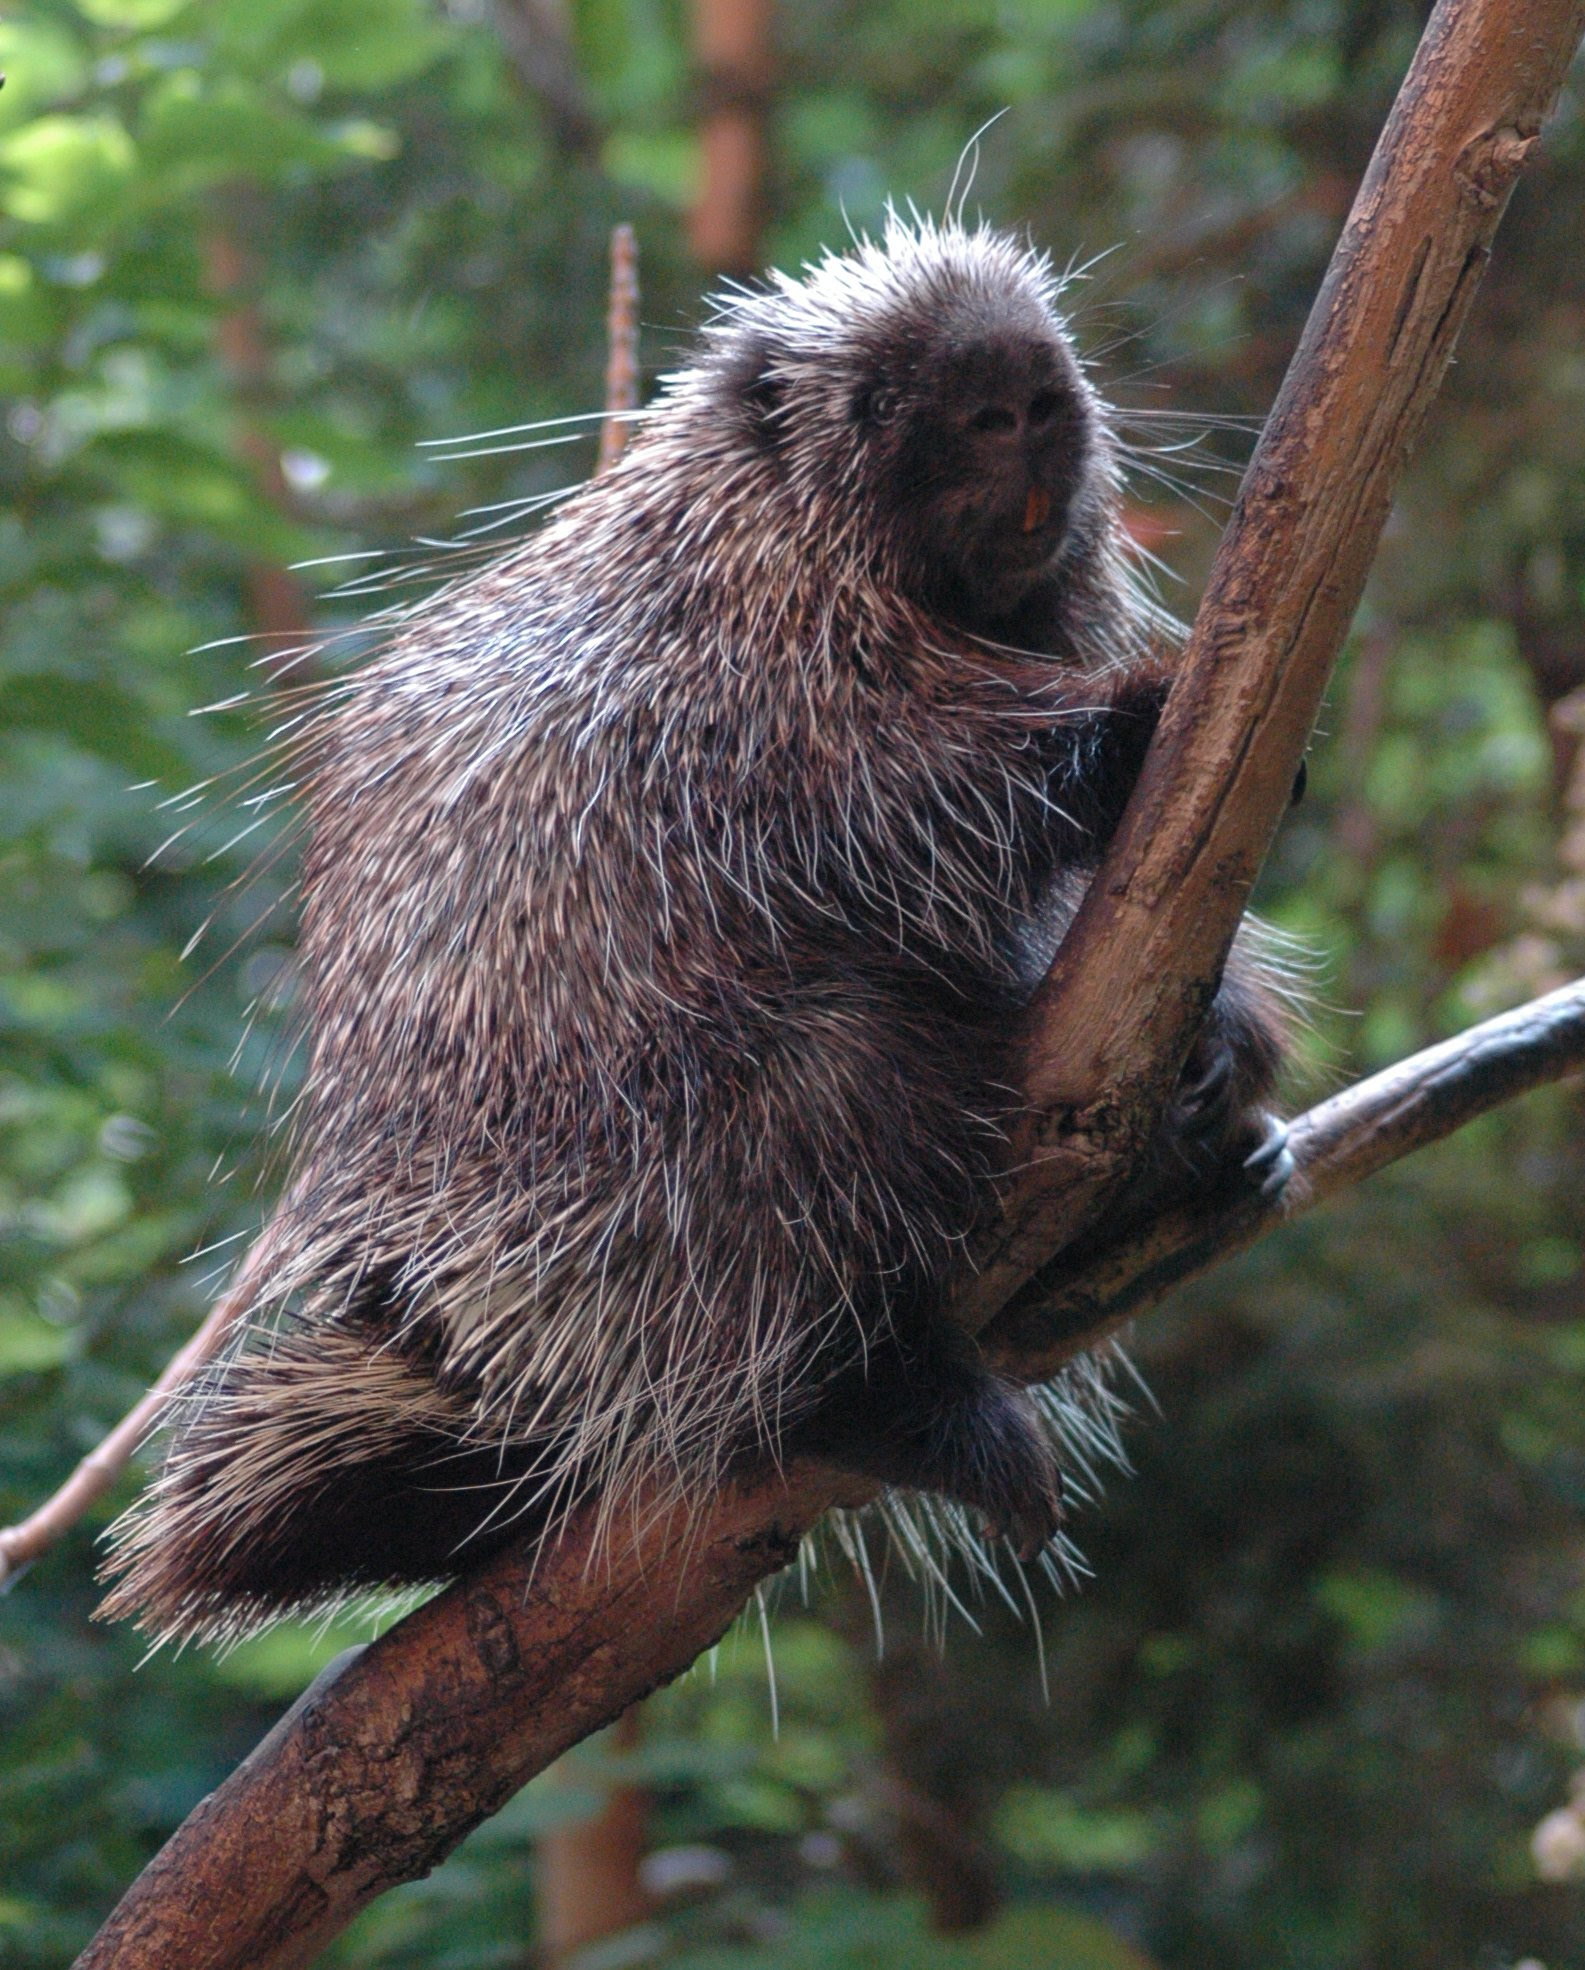 Porcupine sitting on a tree branch in a forest